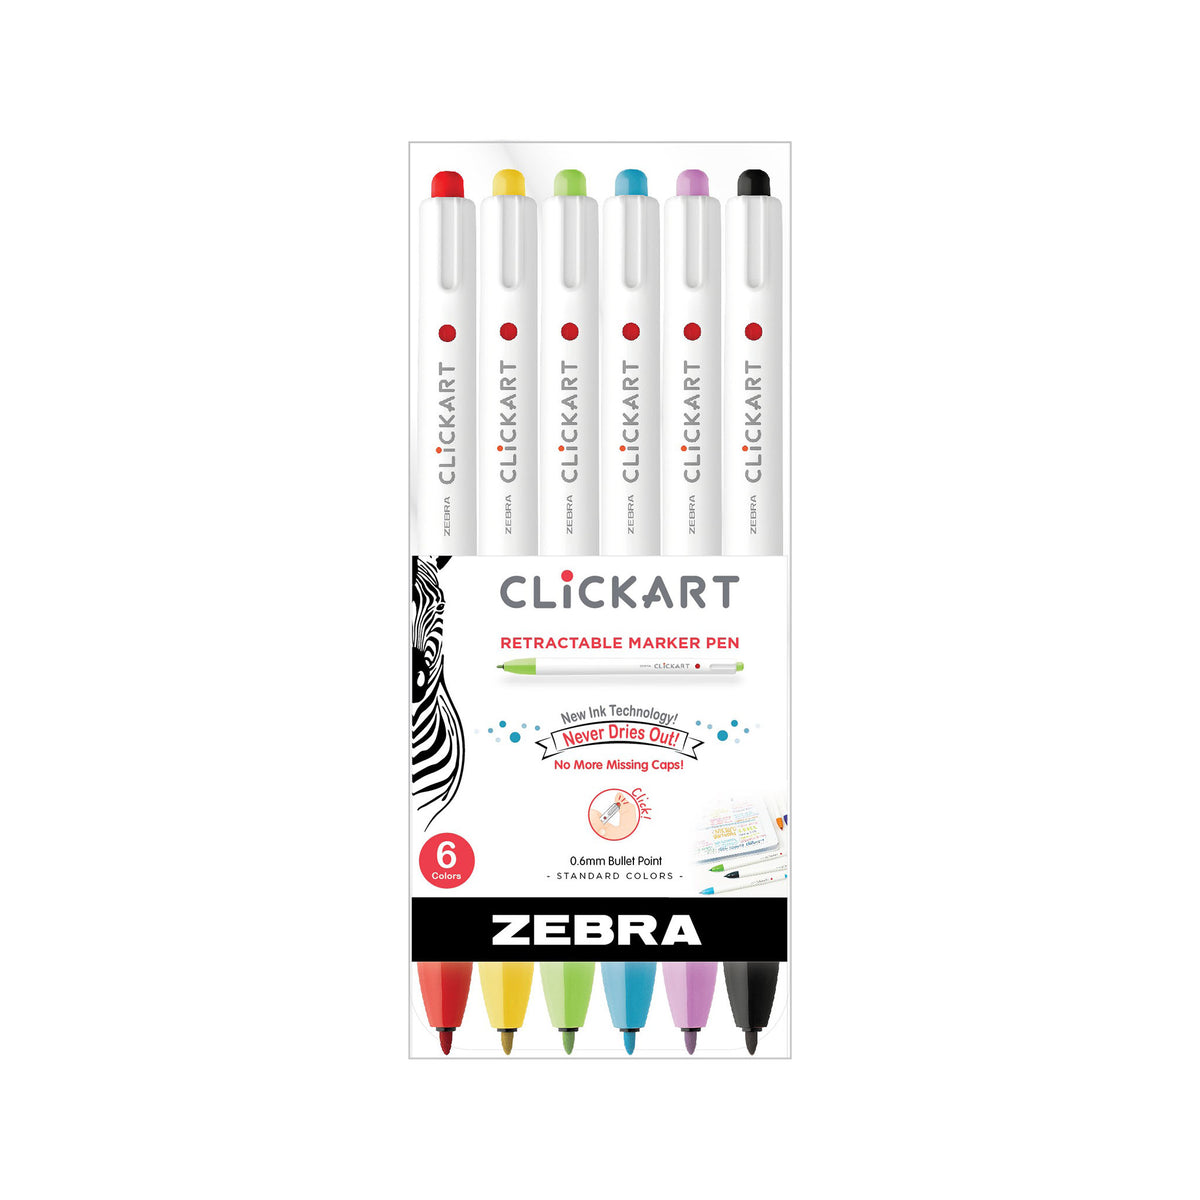 Seriously Fine Markers - Set of 36 by Ooly